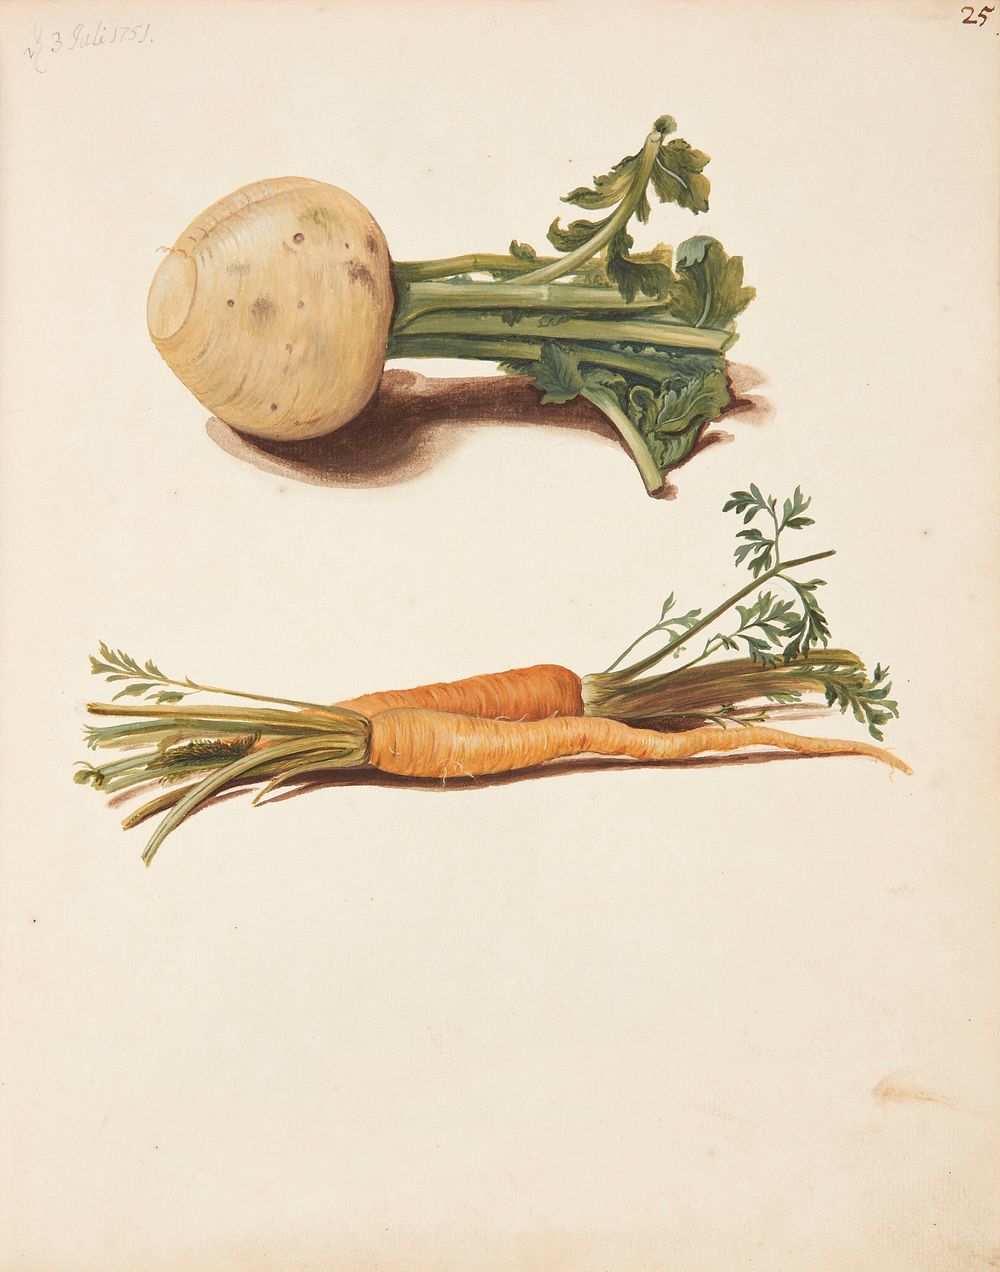 Study of turnips and carrots by Johanna Fosie